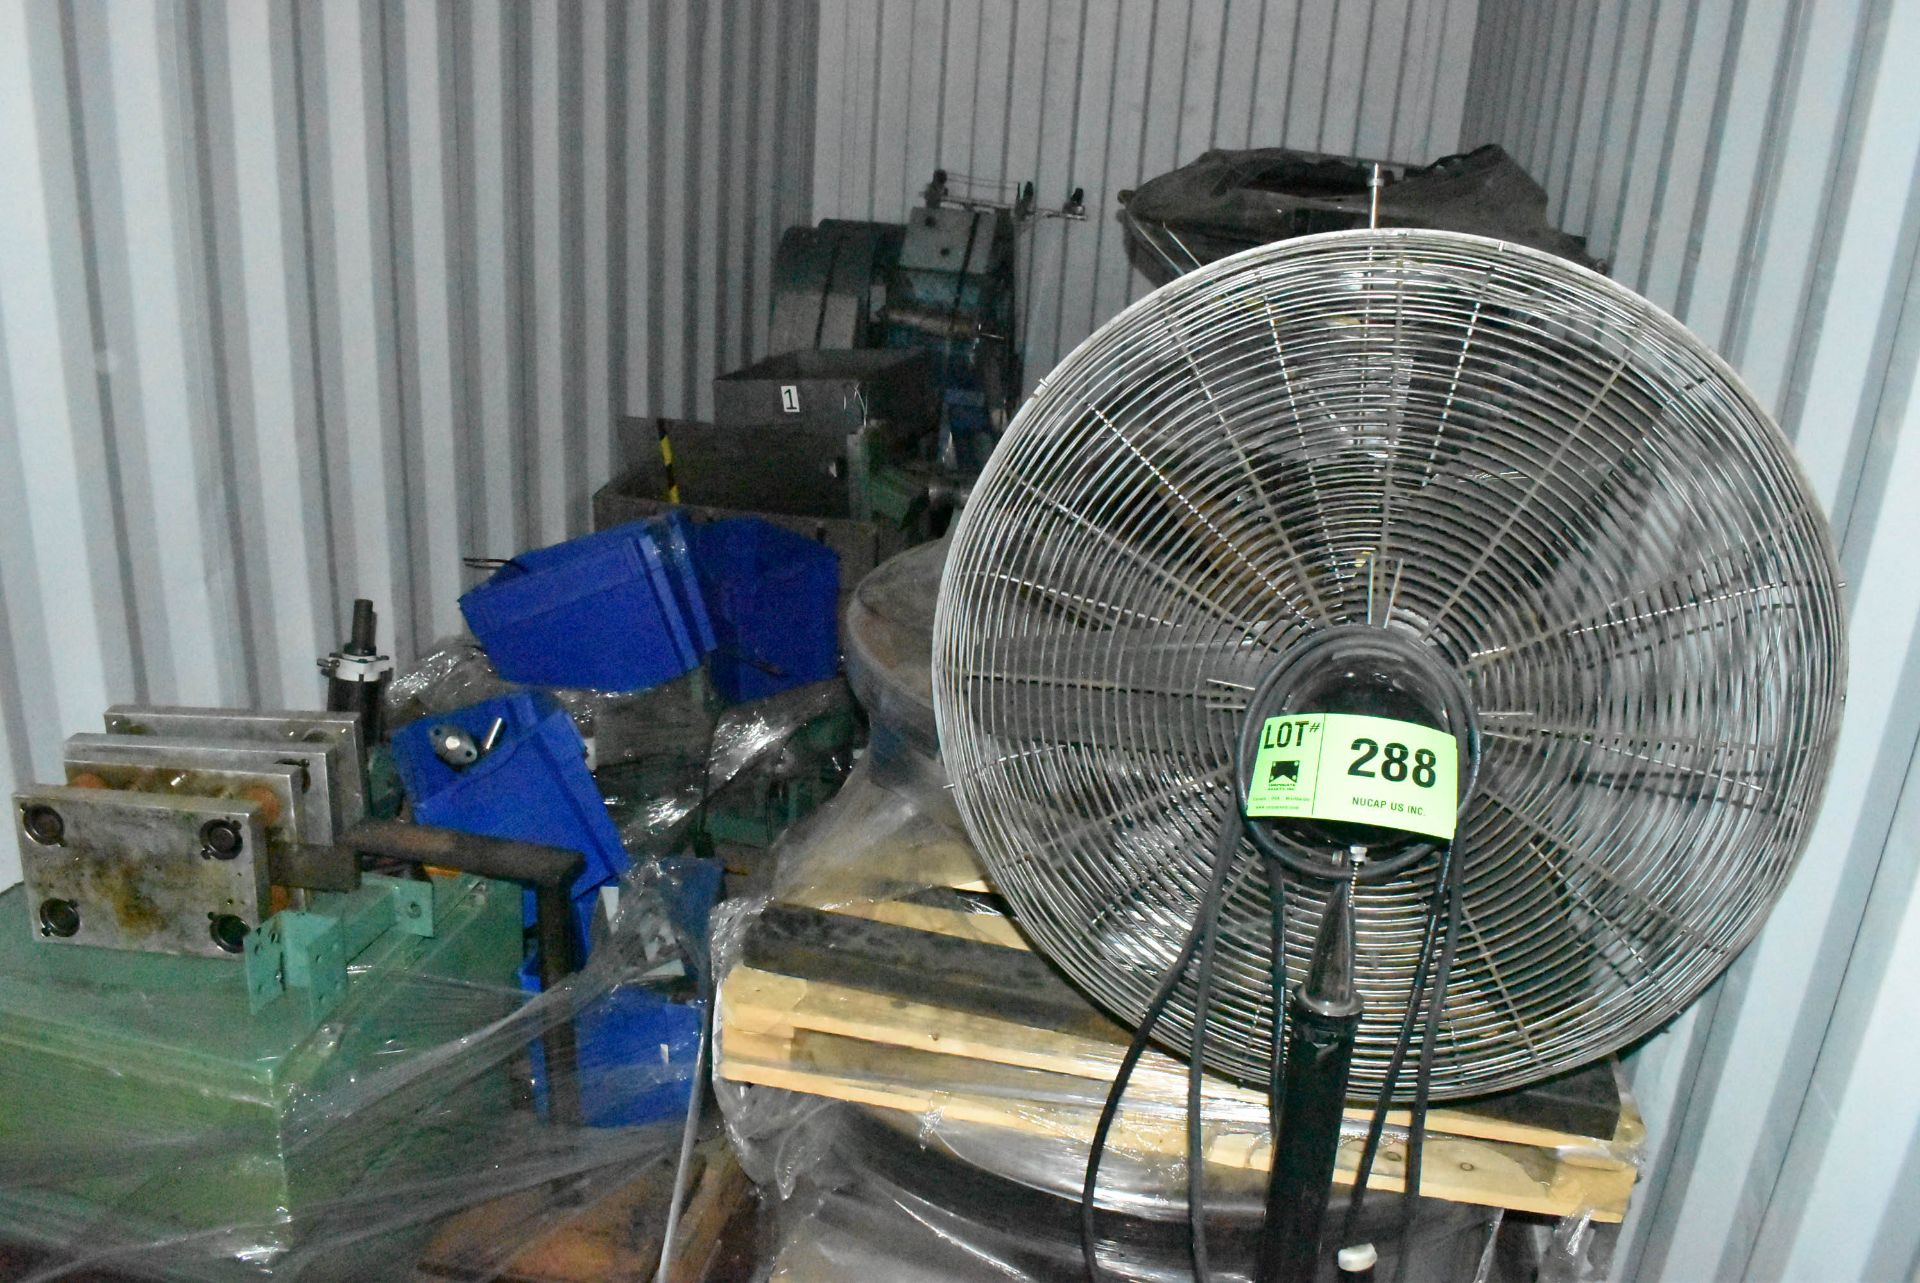 LOT/ REMAINING CONTENTS OF CONTAINER - INCLUDING SHOP FAN, WRIGHT HOIST WITH TROLLEY, ELECTRICAL